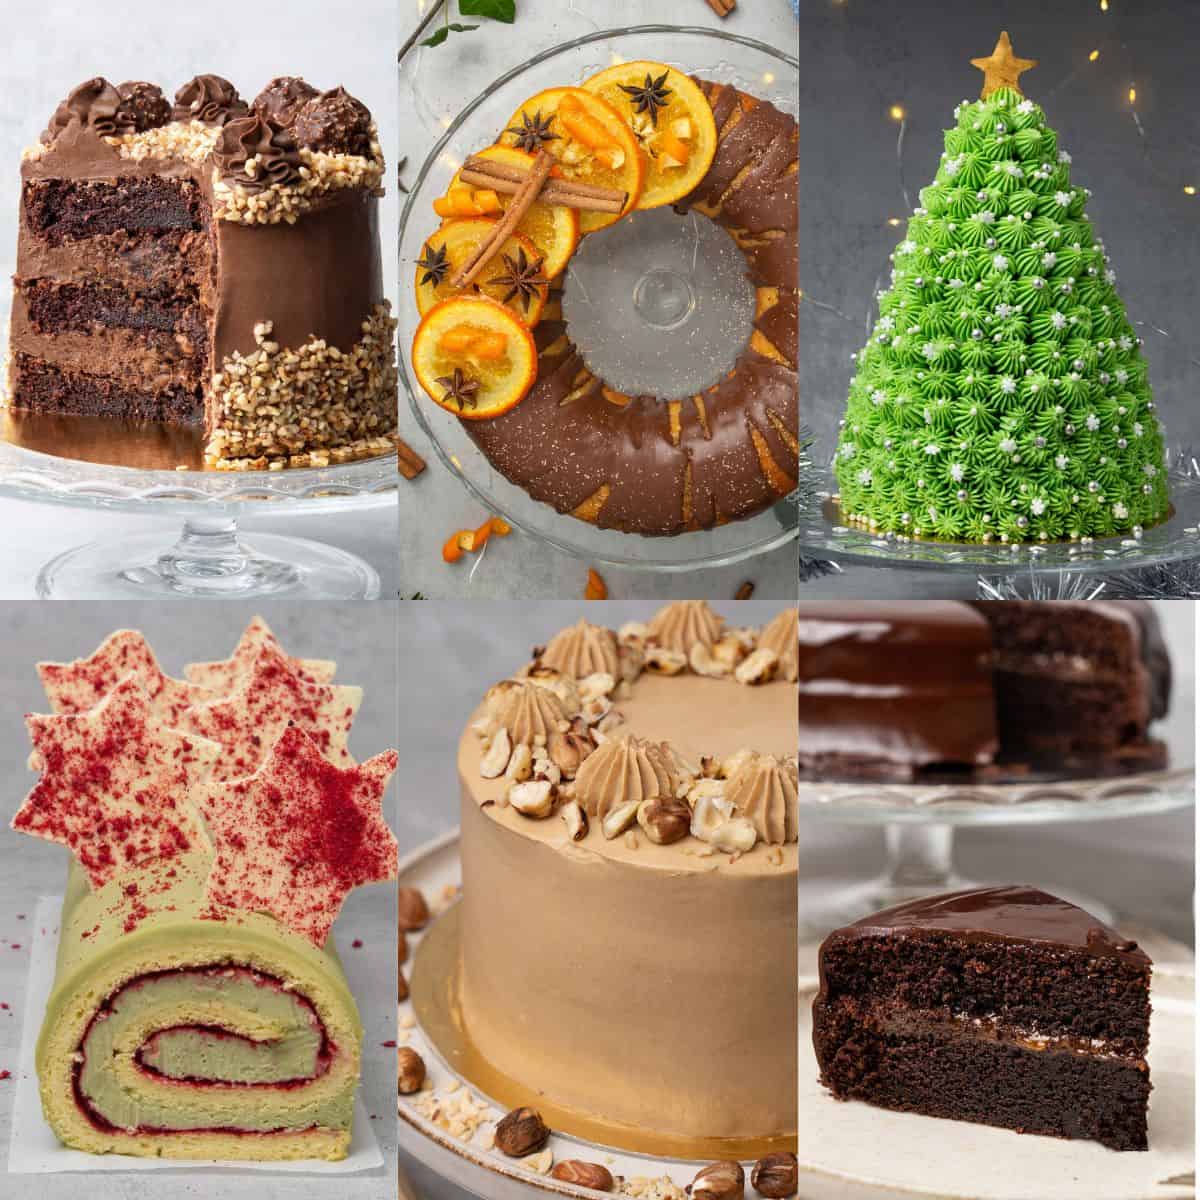 <p>Ring in the festive season with the<strong> best Christmas cakes</strong>! This list of cakes to bake for Christmas is full of classic flavors and traditional recipes to make the most of the holiday season.</p><p><strong>Go to the recipe: <a href="https://www.spatuladesserts.com/christmas-cakes/">Christmas Cakes</a></strong></p><p><strong><strong>This article was first published as <a href="https://www.spatuladesserts.com/american-desserts/">Classic American Desserts</a> at <a href="http://www.spatuladesserts.com">Spatuladesserts</a>.</strong></strong></p>